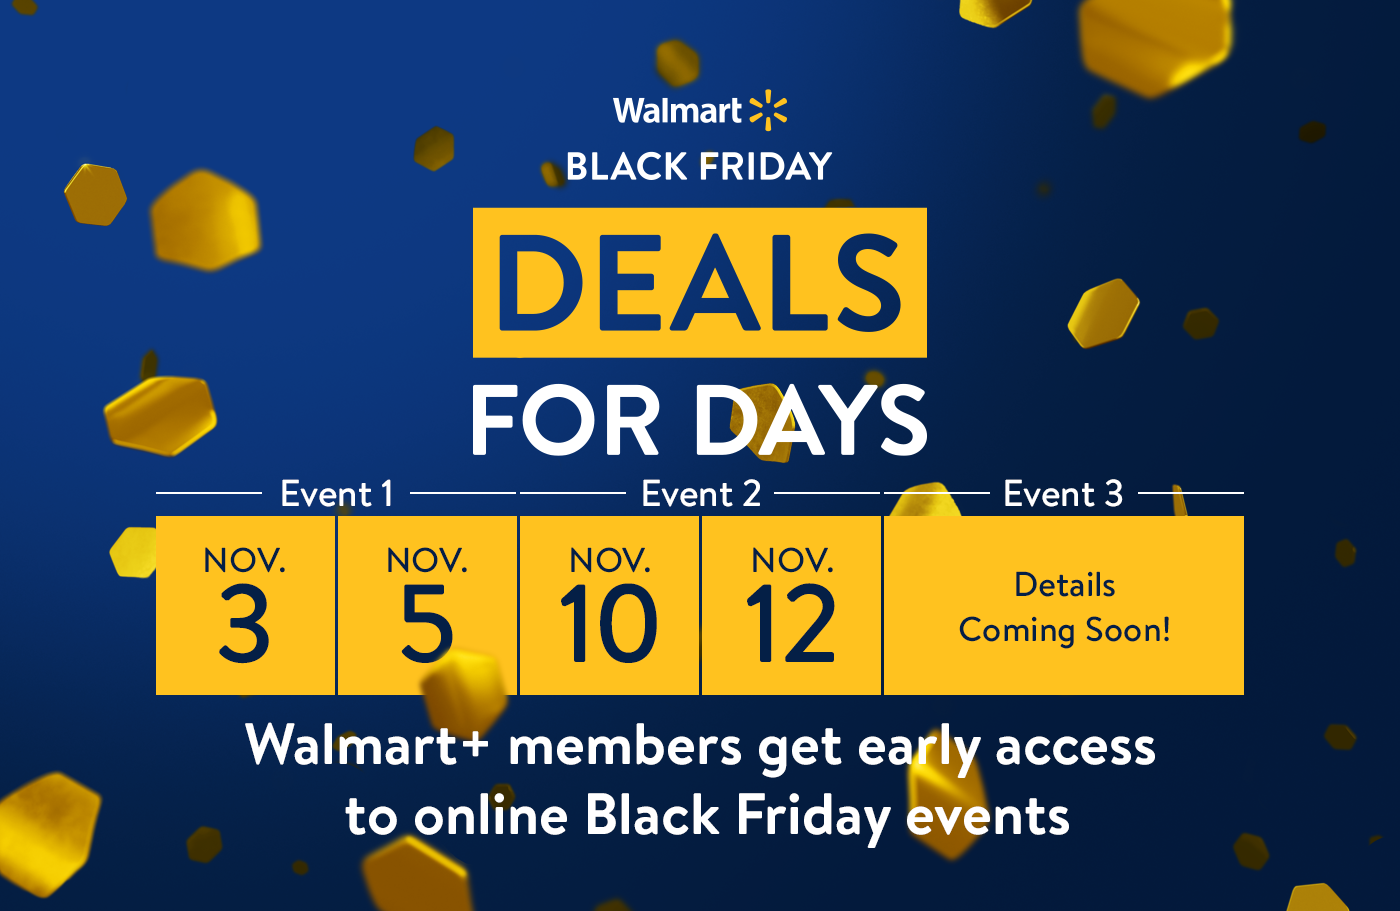 Walmart's Black Friday Deals for Days launch today with early access for  Walmart+ members 